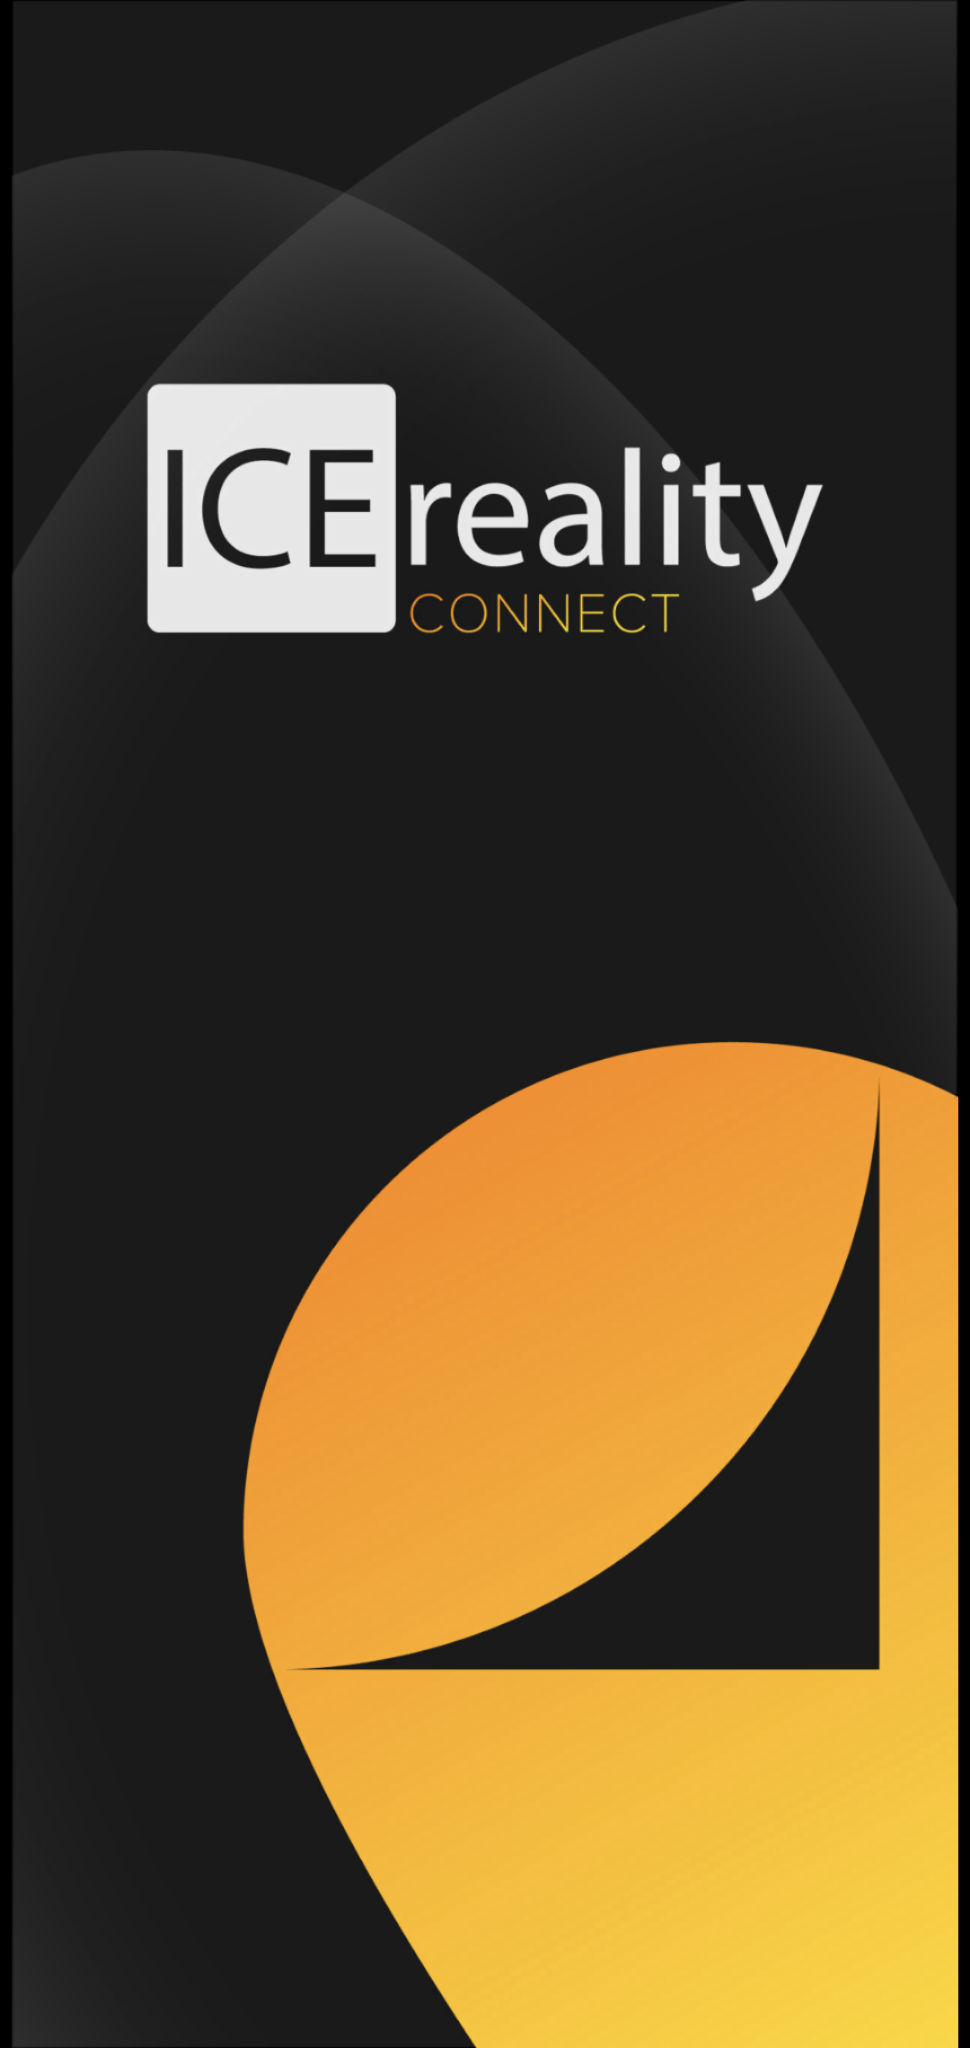 IMG-ICEreality-Connect_Mobile_007 The ICEreality Connect splash screen on an Android device